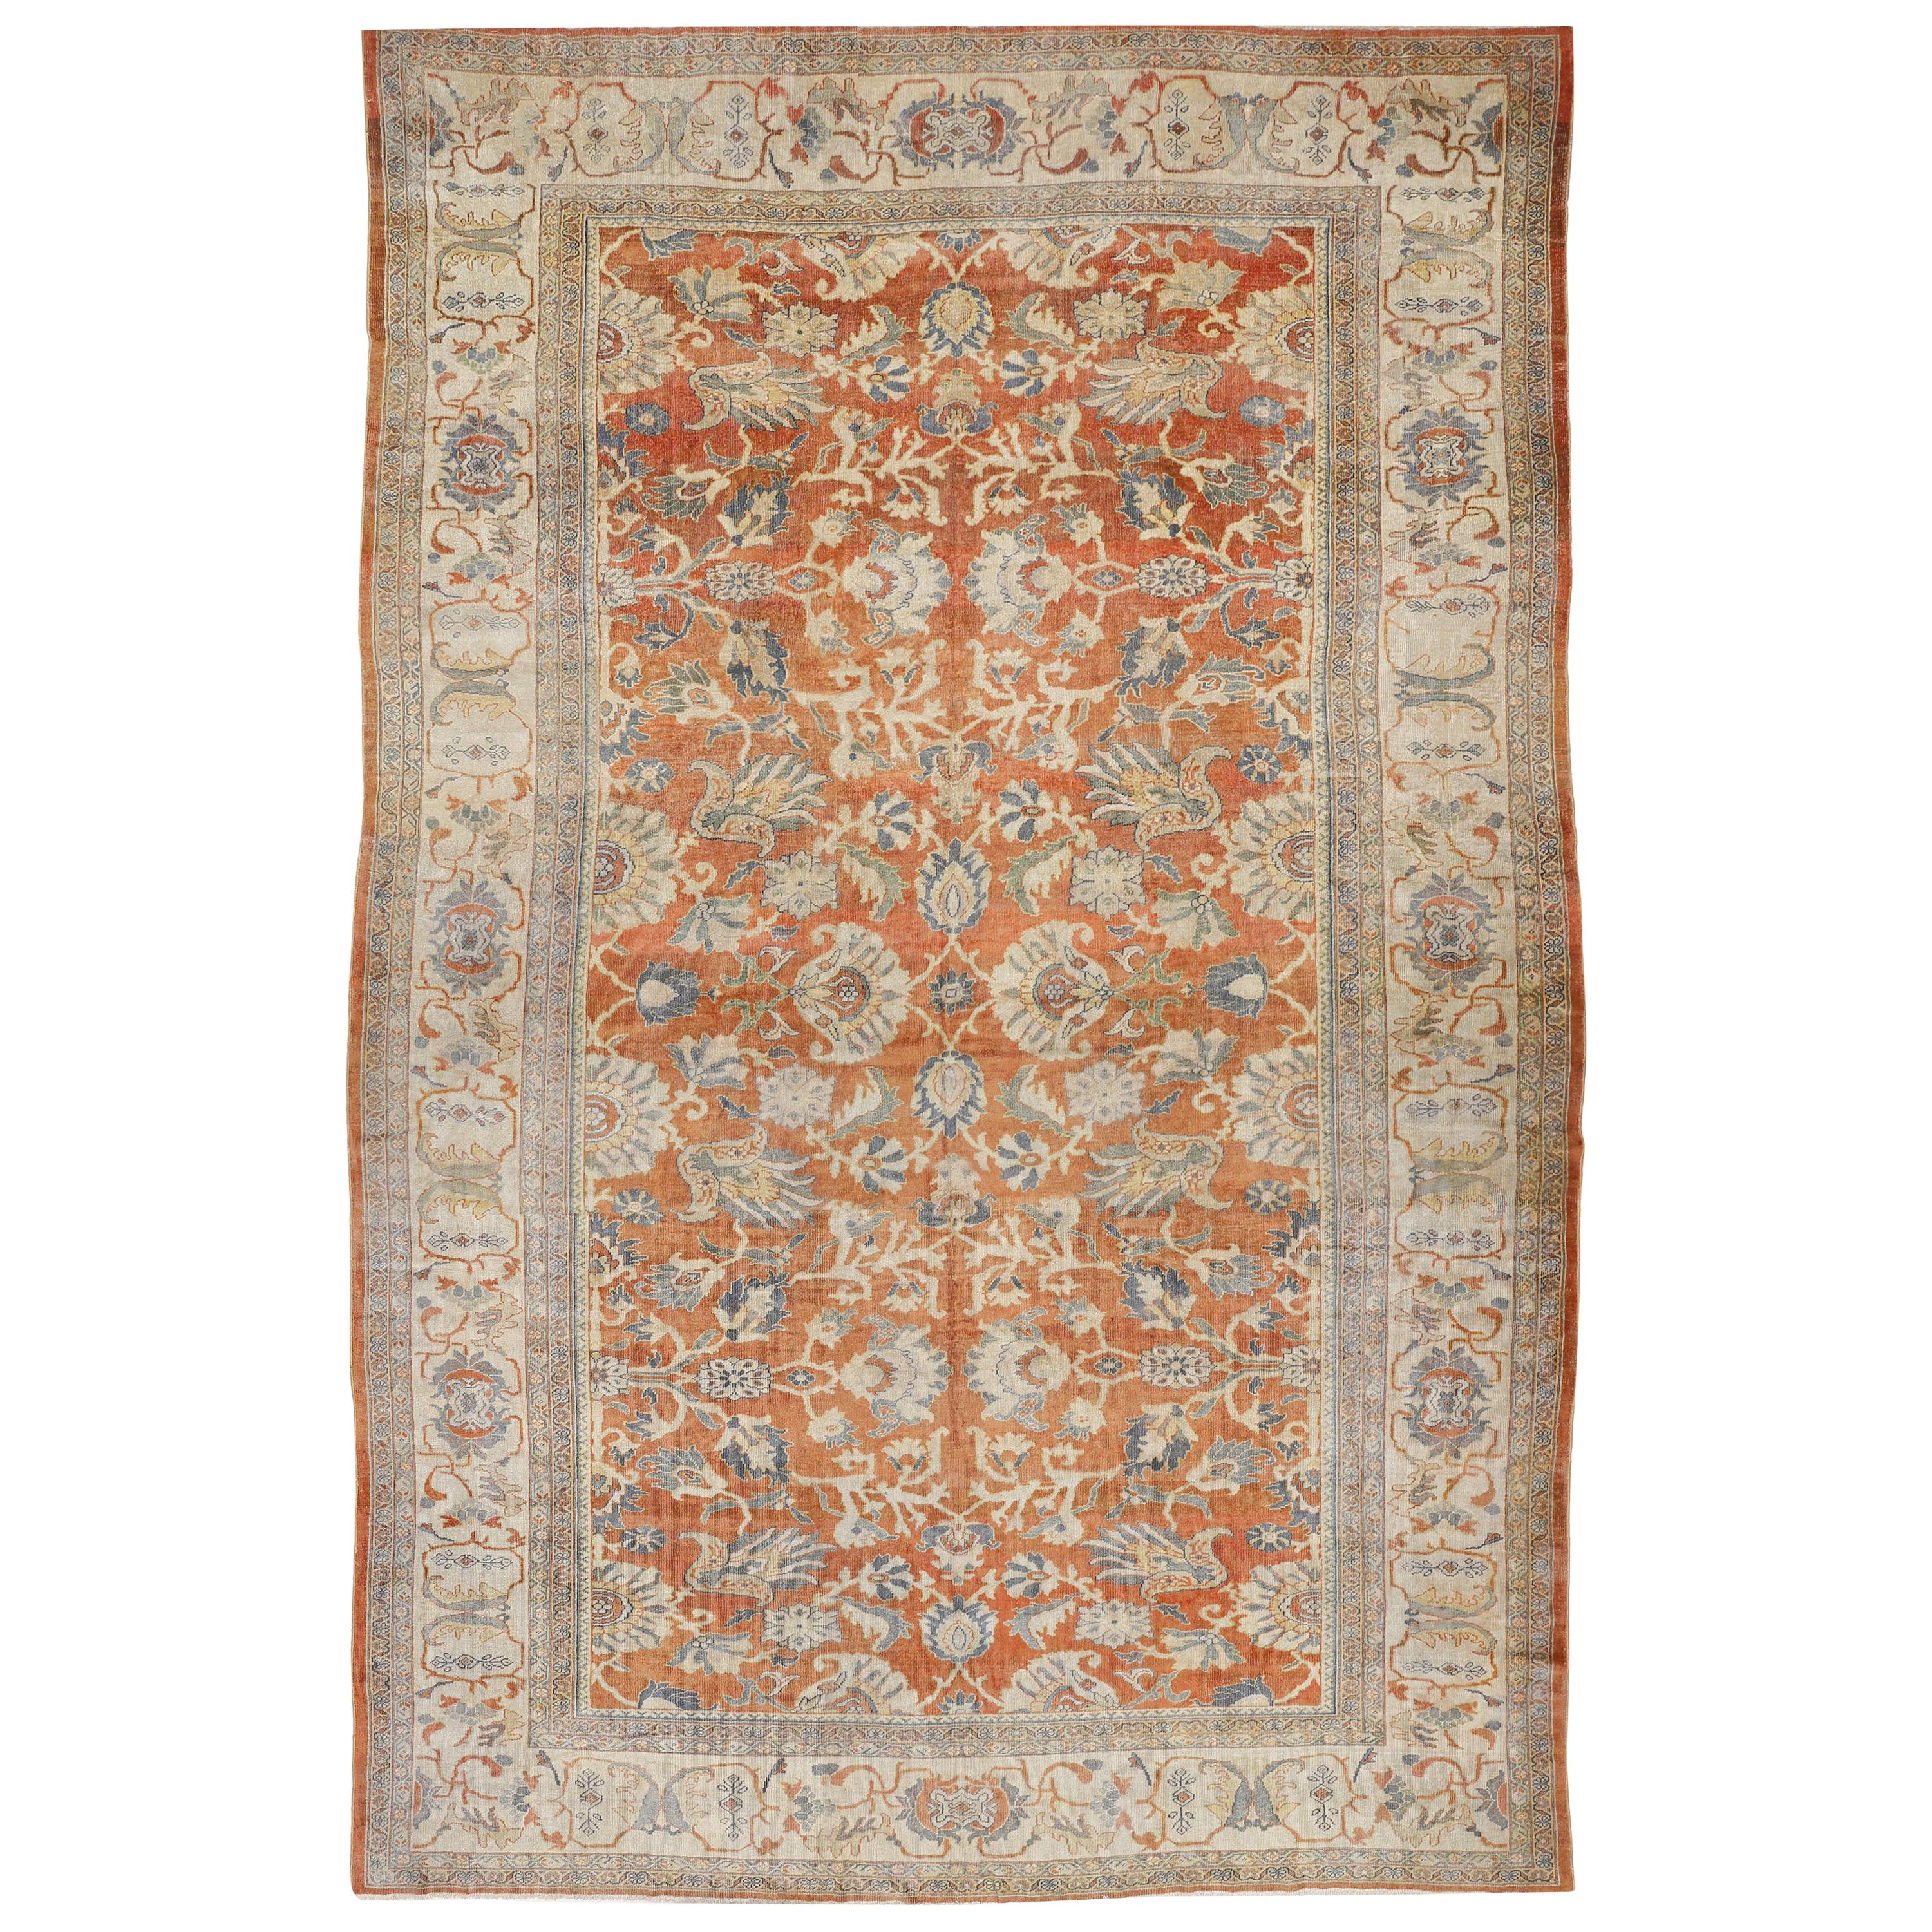 Oversize Ziegler Sultanabad Style All-Over Design Rug